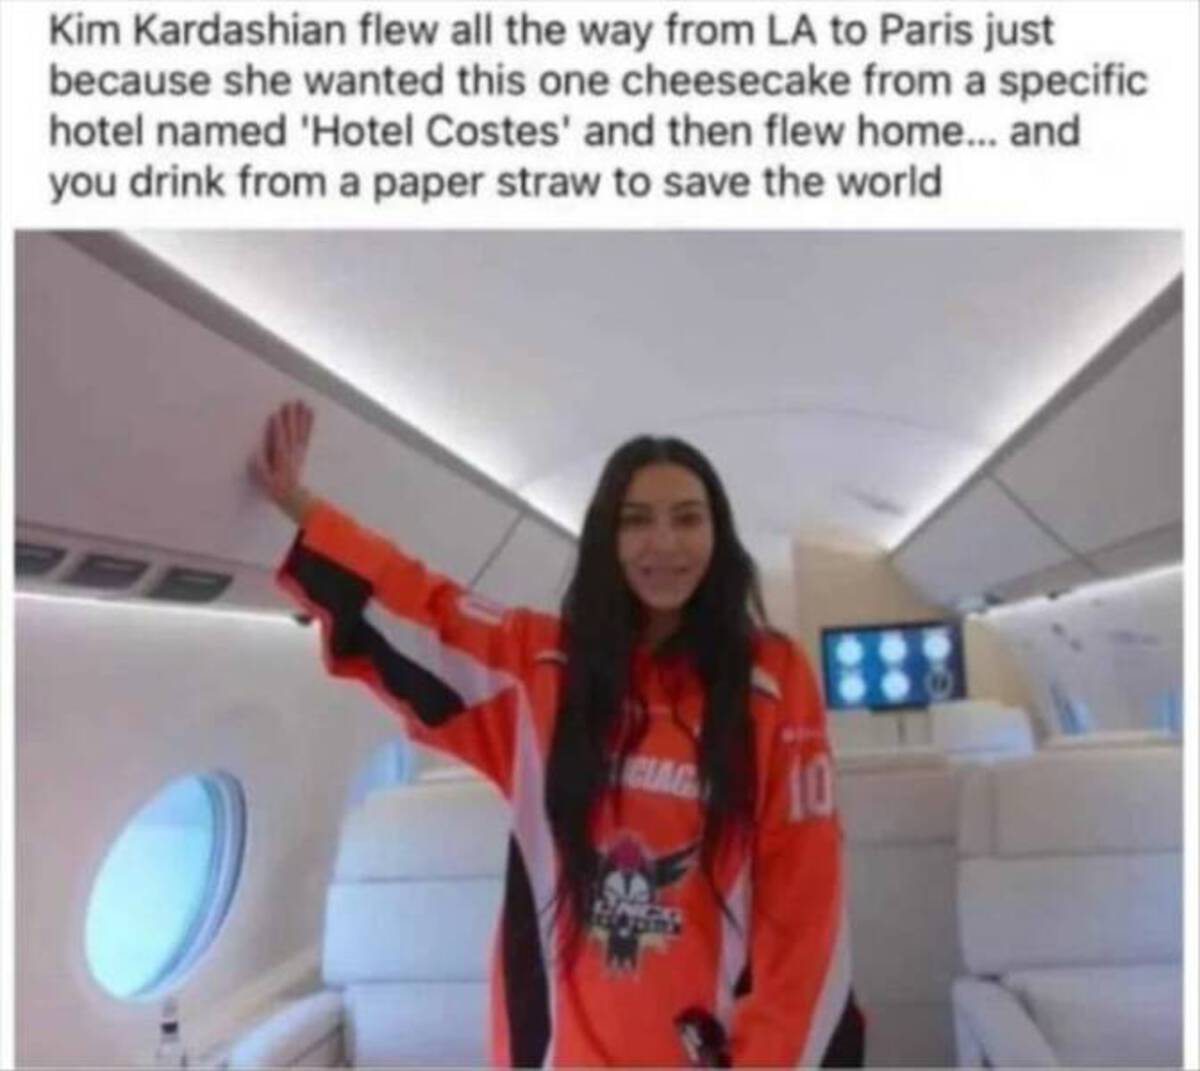 kim kardashian flew to paris for cheesecake - Kim Kardashian flew all the way from La to Paris just because she wanted this one cheesecake from a specific hotel named 'Hotel Costes' and then flew home... and you drink from a paper straw to save the world 